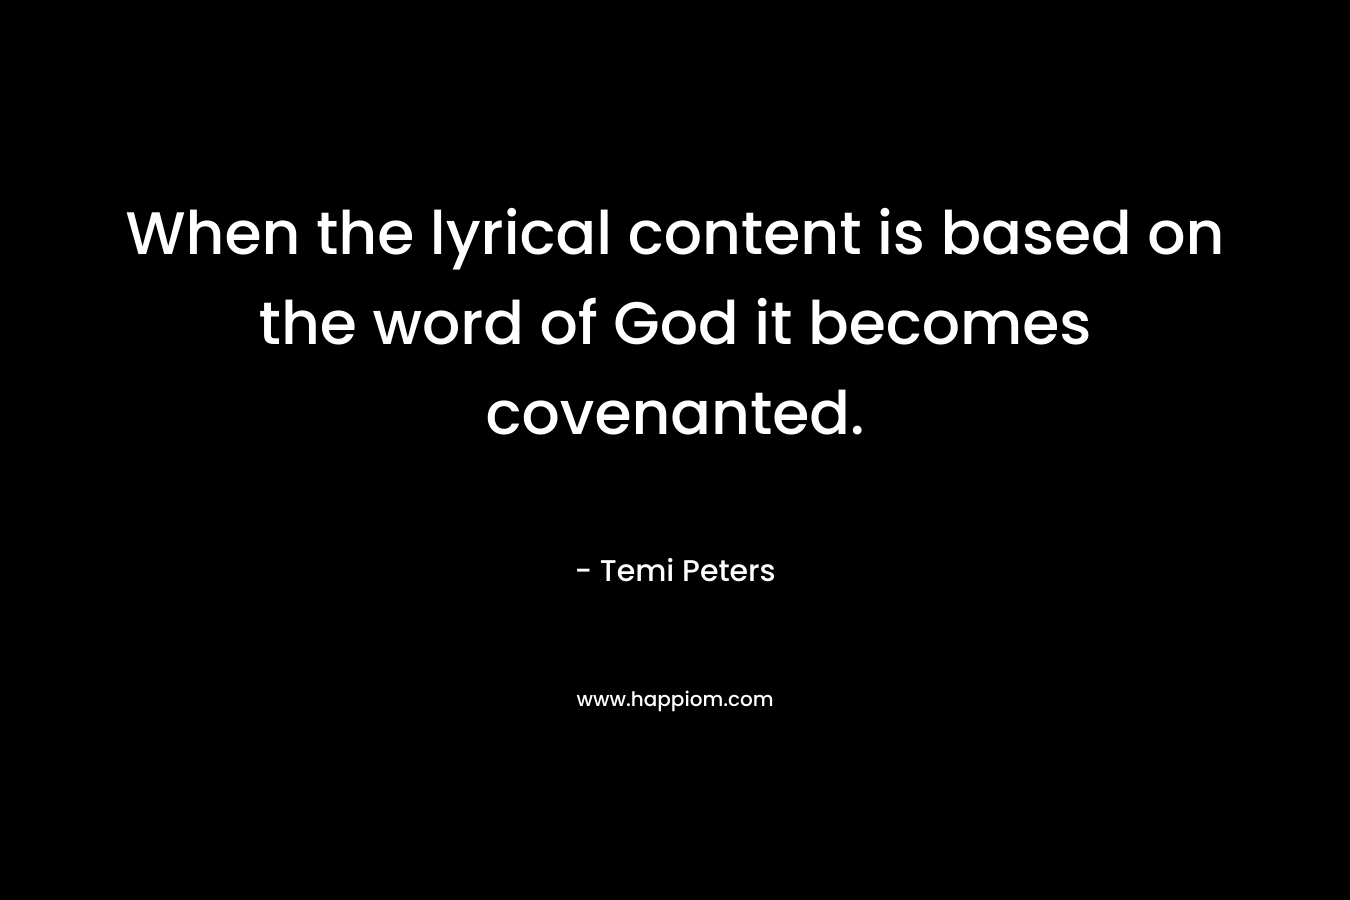 When the lyrical content is based on the word of God it becomes covenanted.